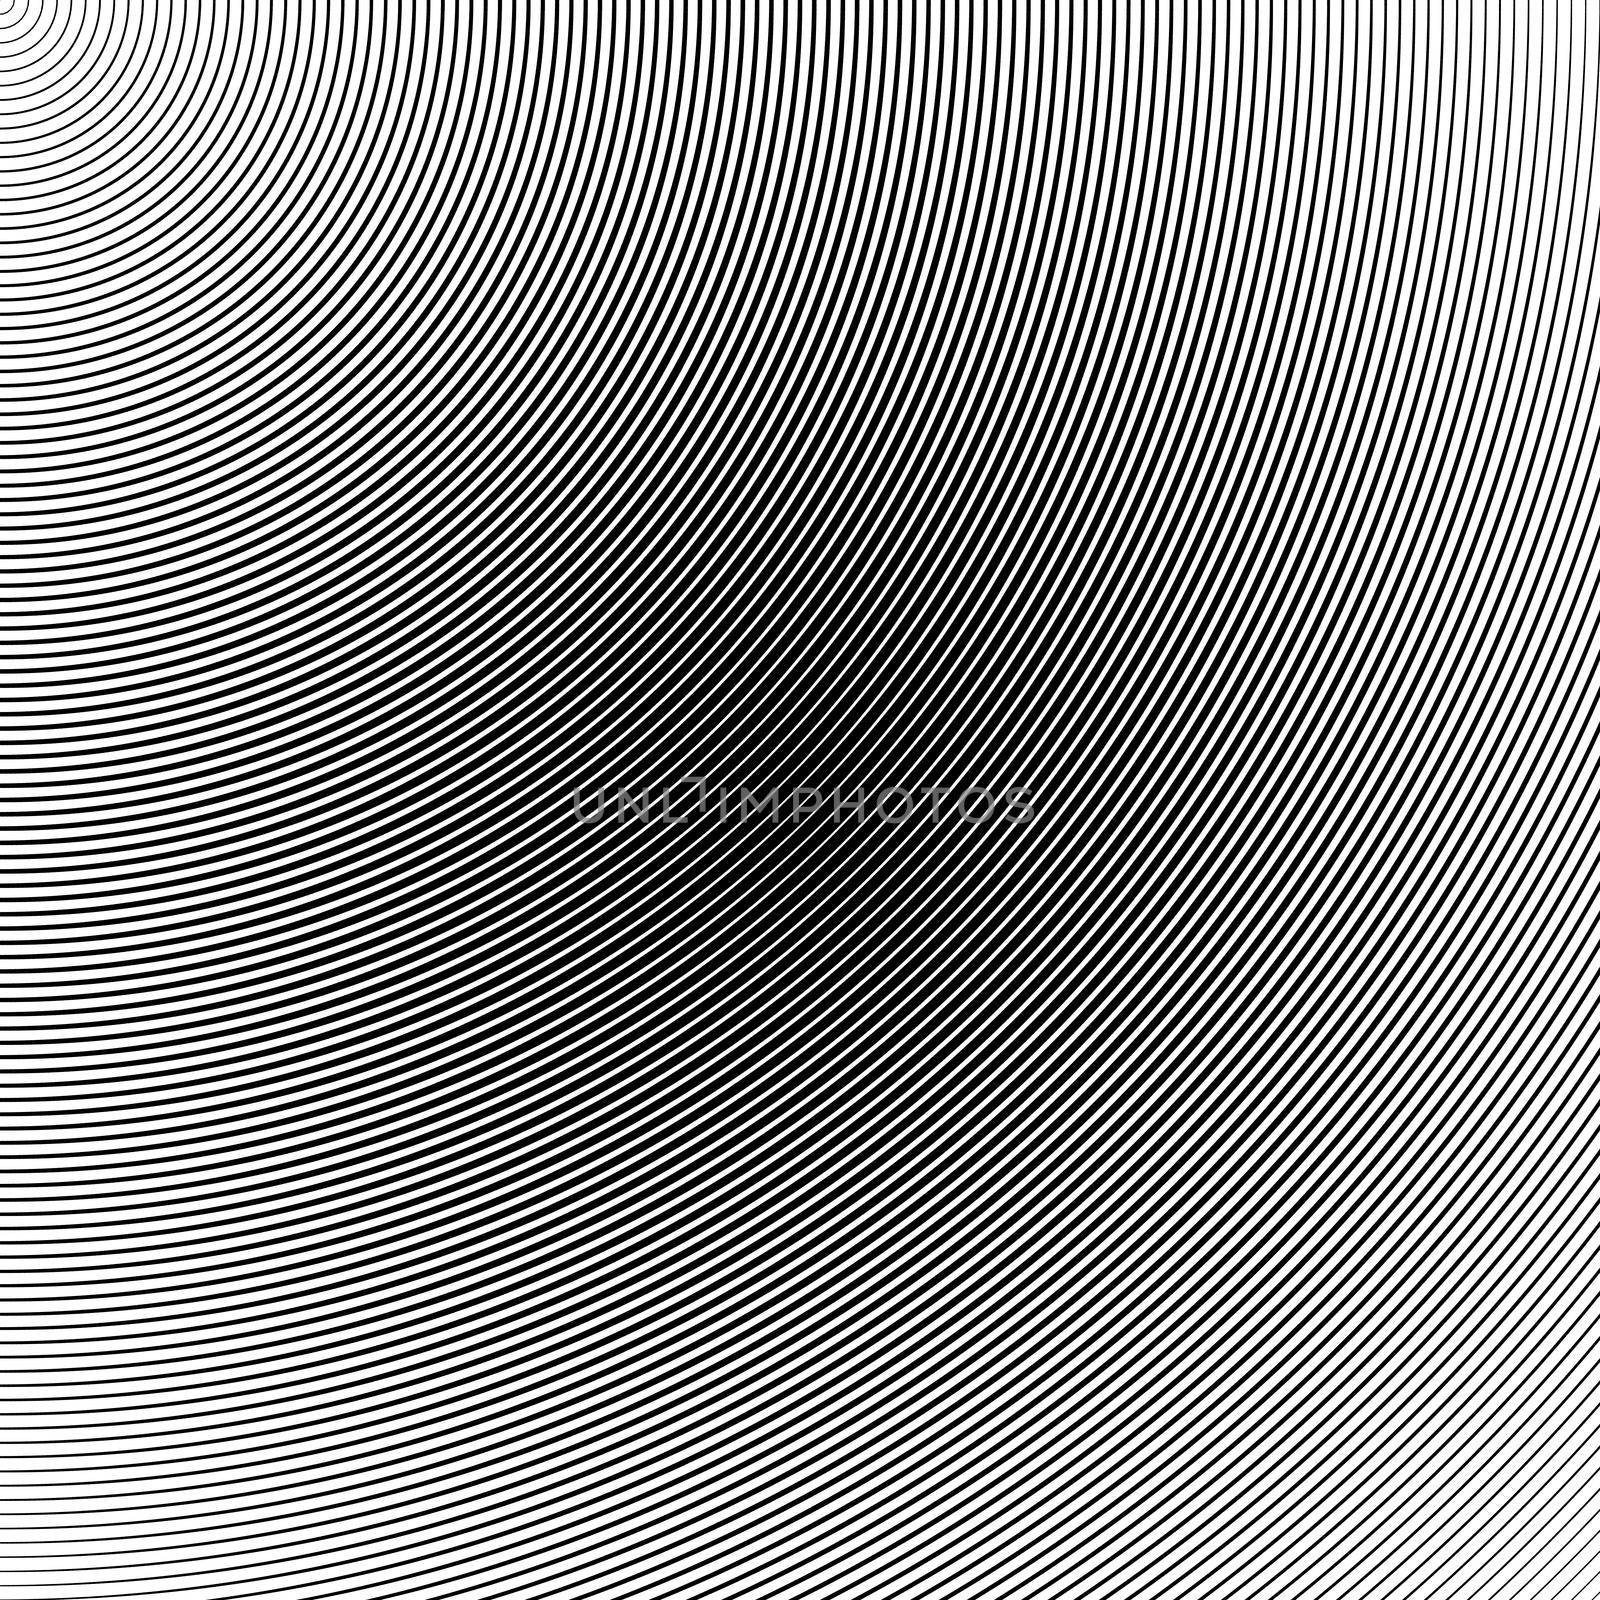 Halftone circle background, abstract gradient illustration